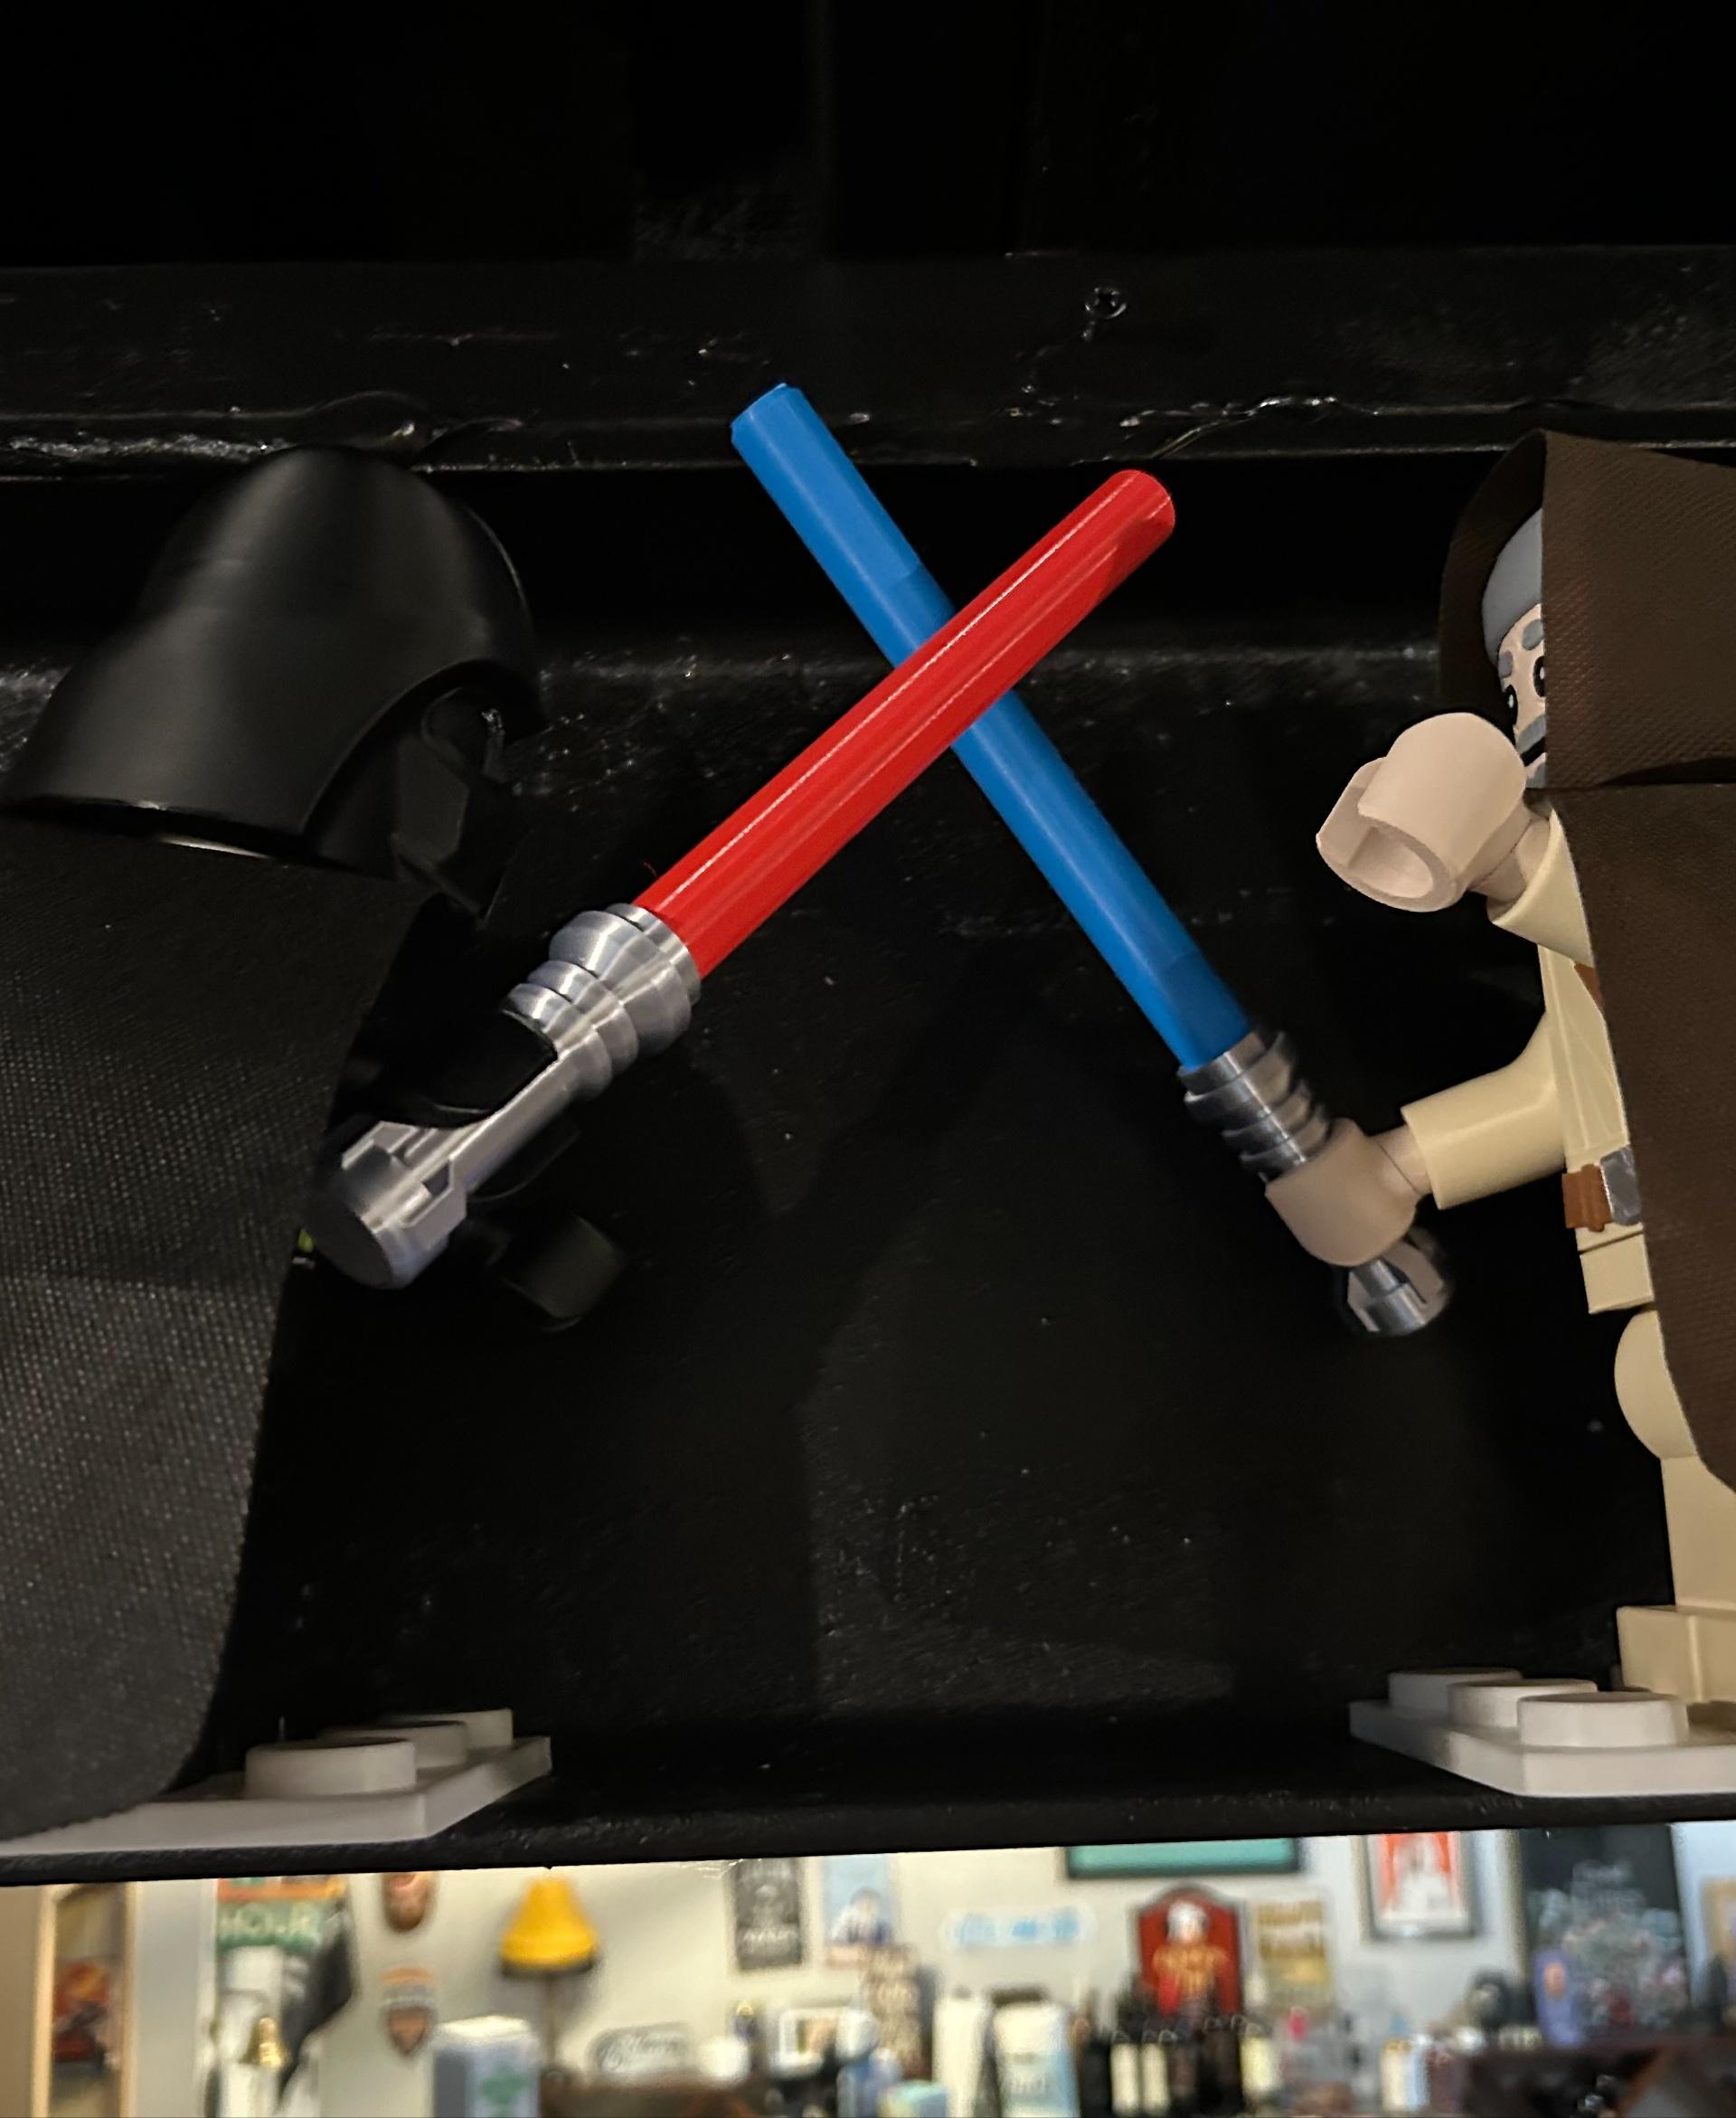 Darth Vader (6:1 LEGO-inspired brick figure, NO MMU/AMS, NO supports, NO glue) - This doesn't go well for Ben - 3d model